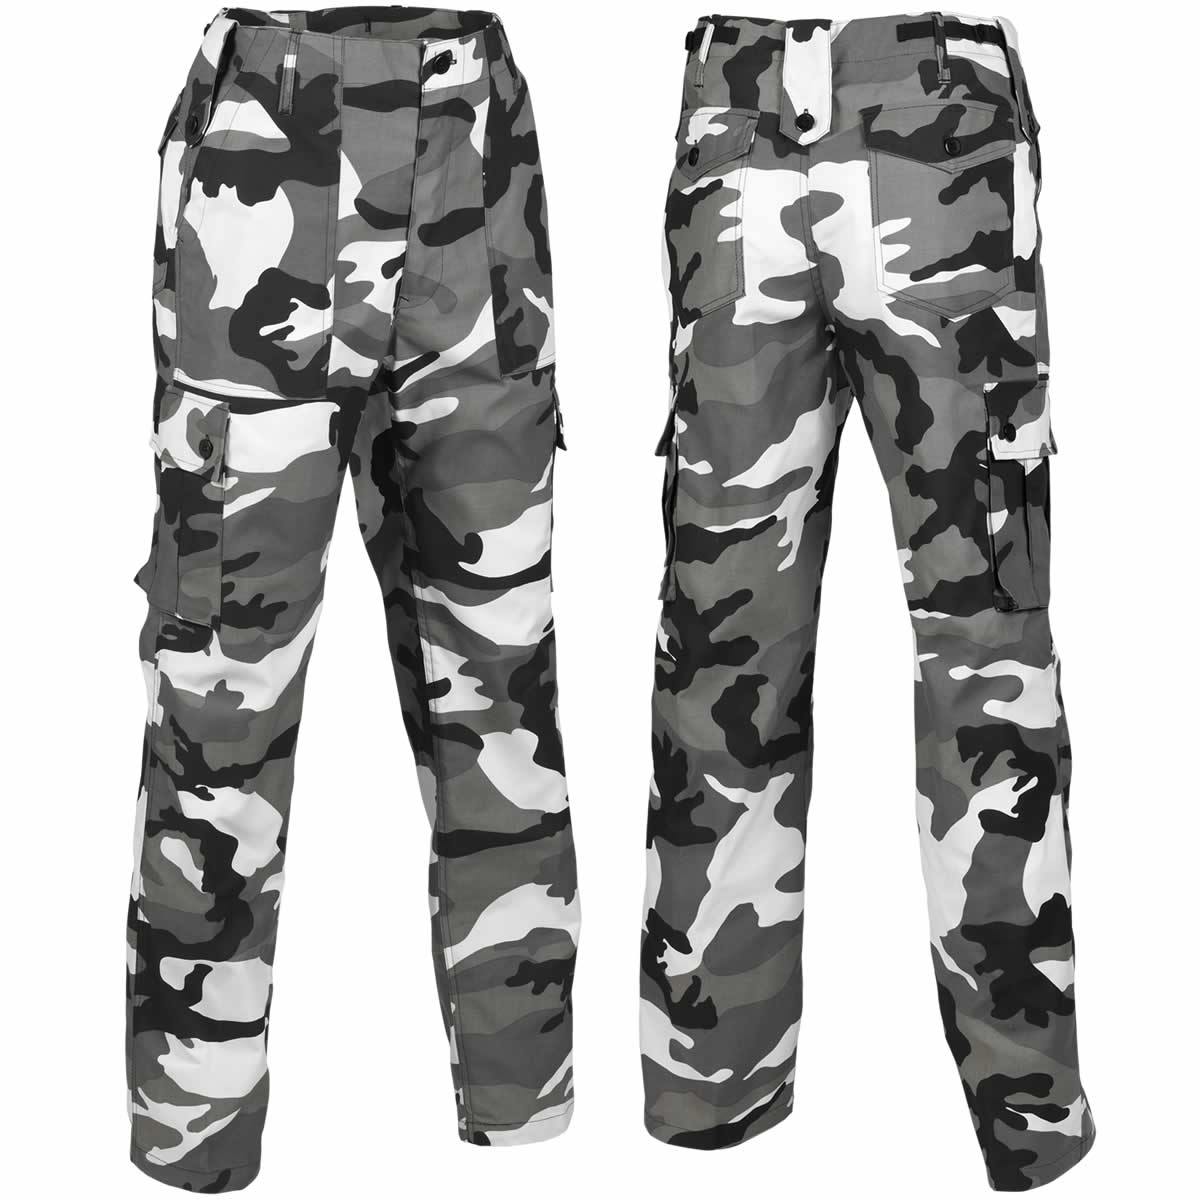 Mens US Army M65 Style Combat Trousers Military BDU Camouflage Cargo ...